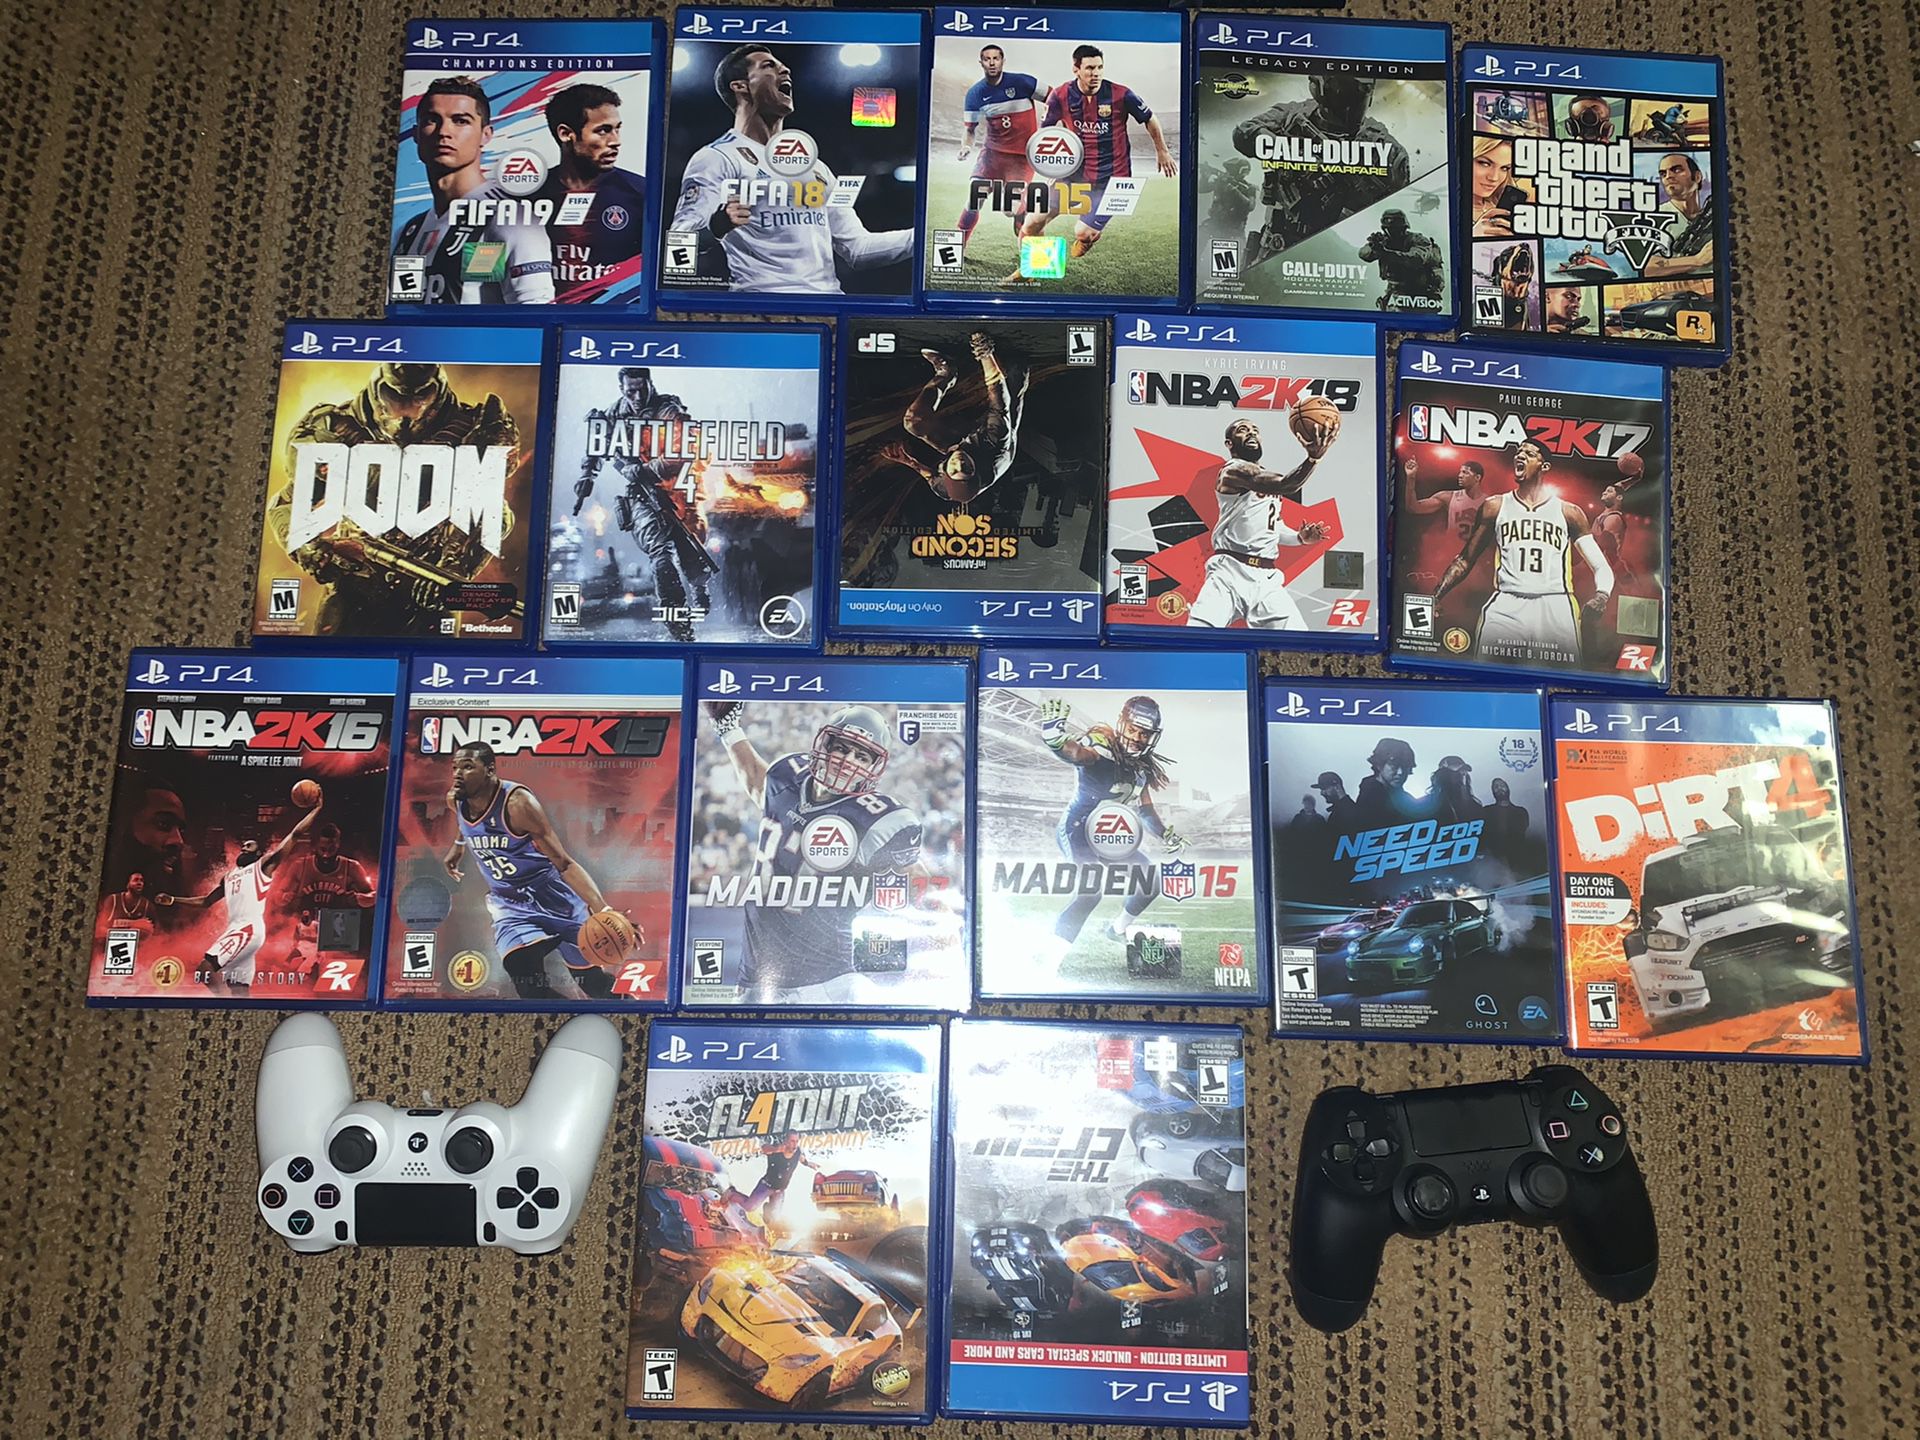 PS4 with 18 games two controllers all cable everything work u can try it out if u like I can deliver also